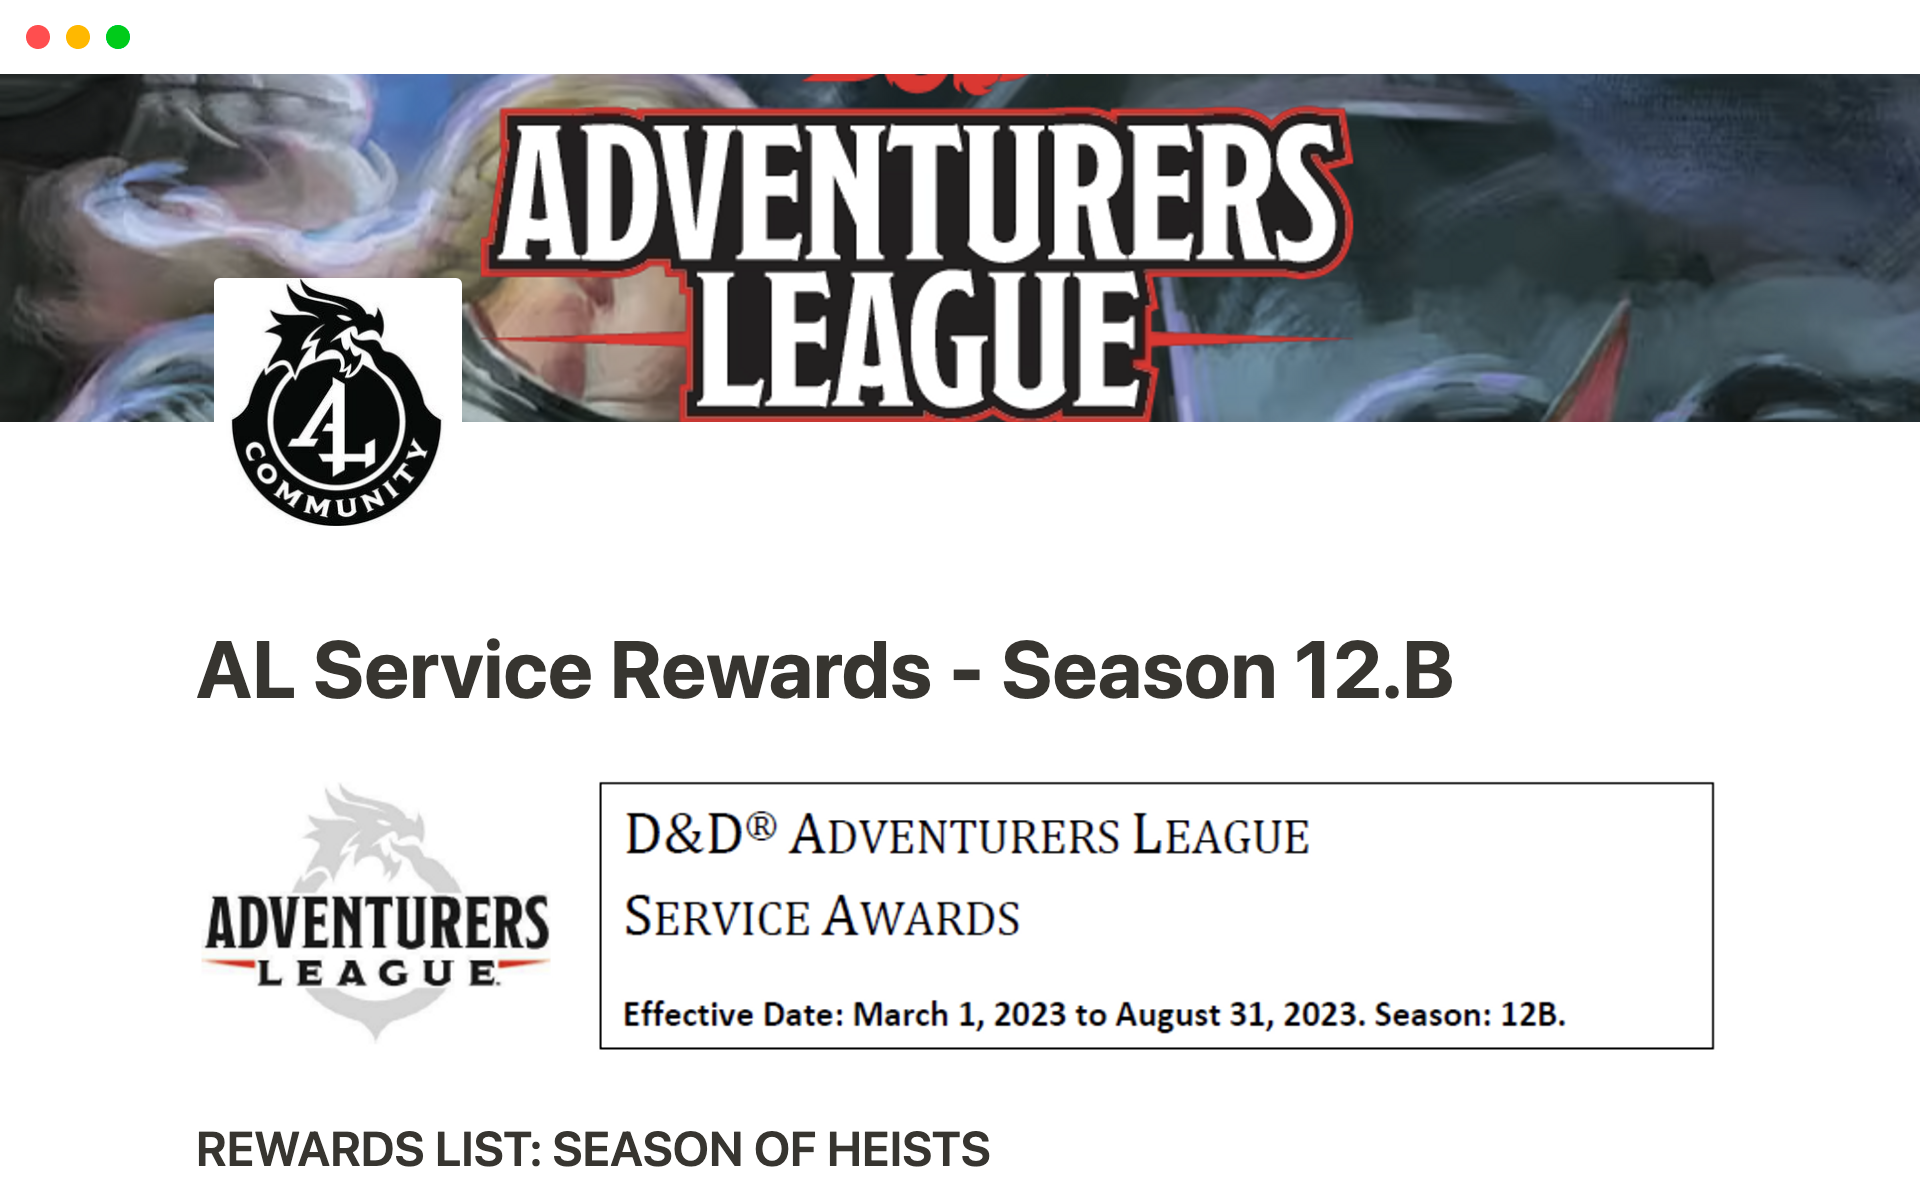 For adventurer's league DM's to track their service hours and awards